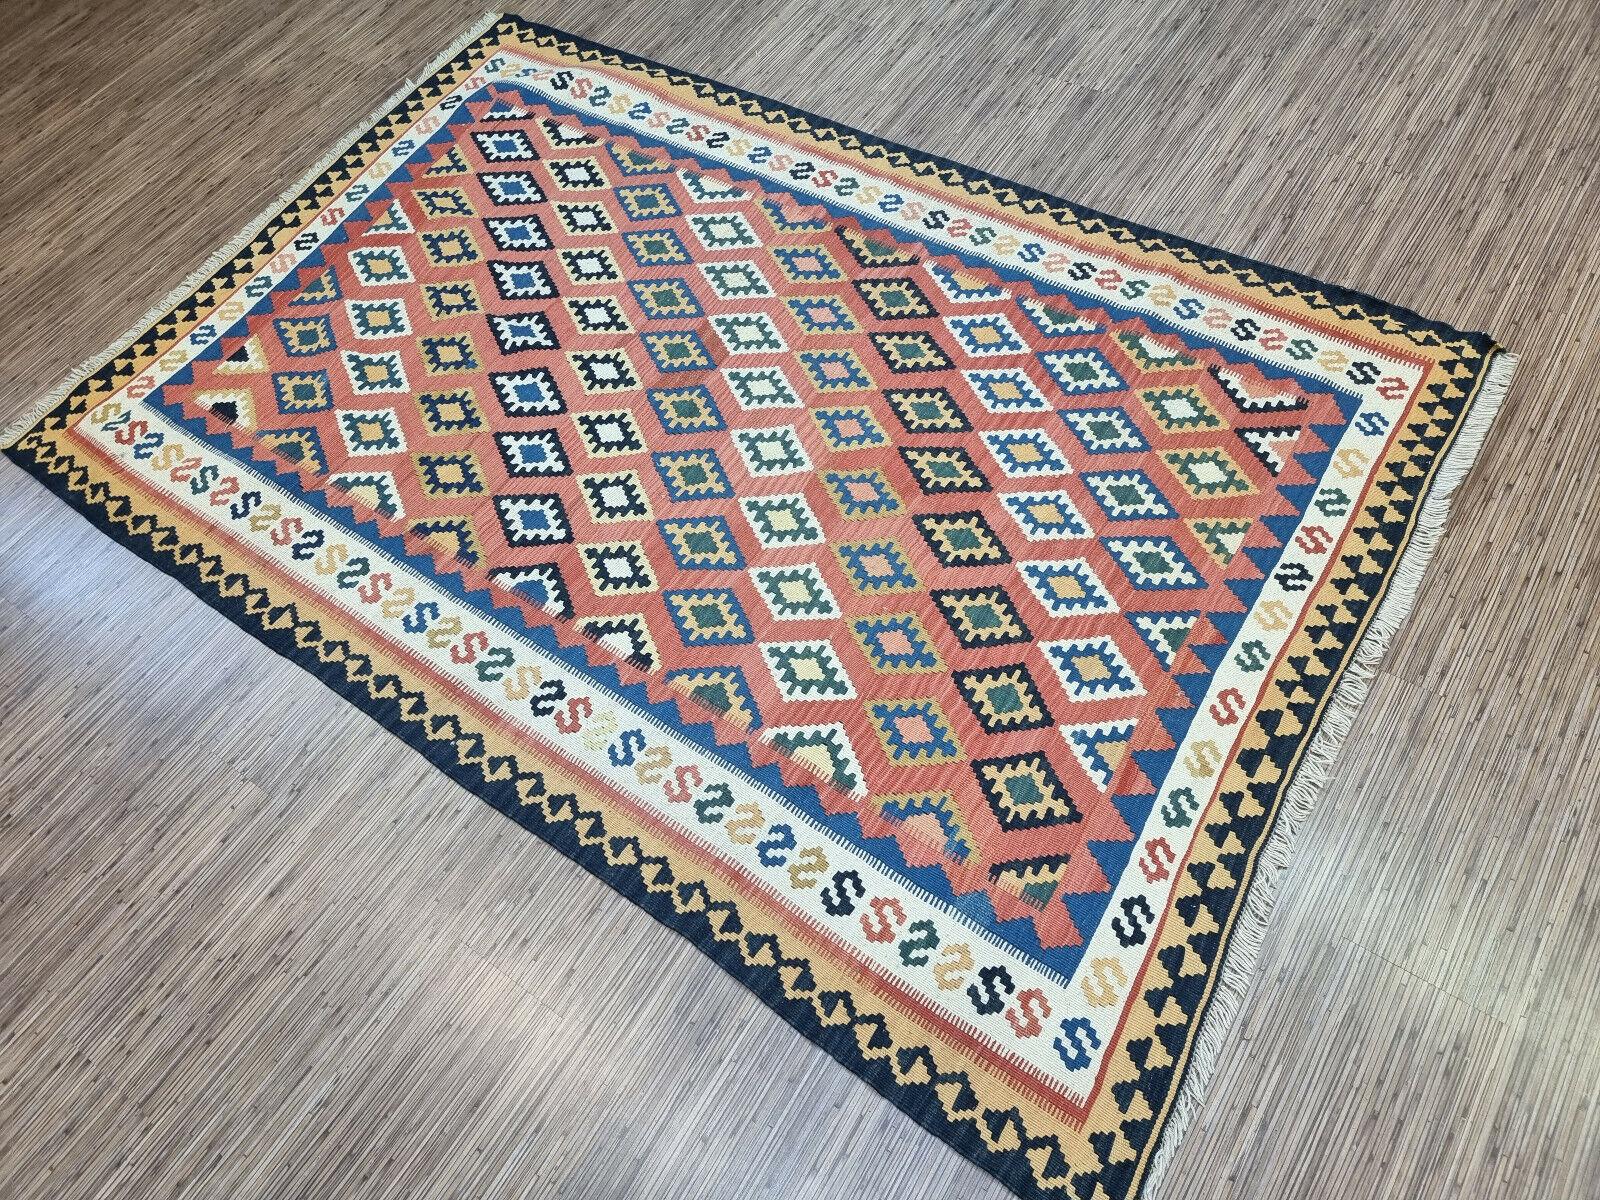 Add a splash of color and charm to your space with this Handmade Vintage Persian Style Ardabil Kilim Rug. This flatweave wool rug, measuring 4.9’ x 7.2’, is a stunning piece of art that showcases the intricate craftsmanship and rich cultural